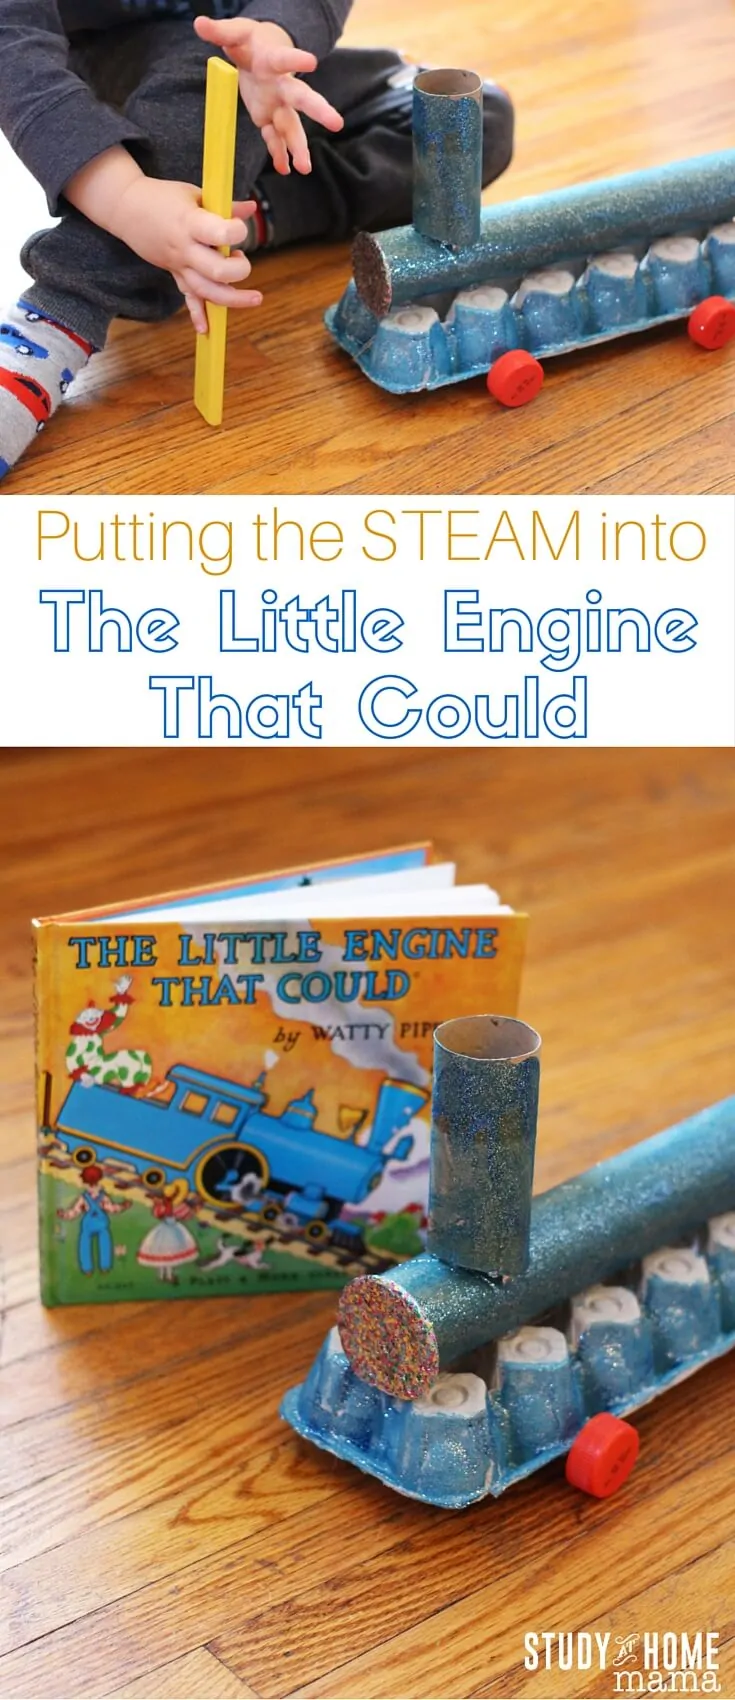 The Little Engine That Could Science Experiment - make your own train craft and then actually make it self-propel with this fun book-inspired activity for kids!